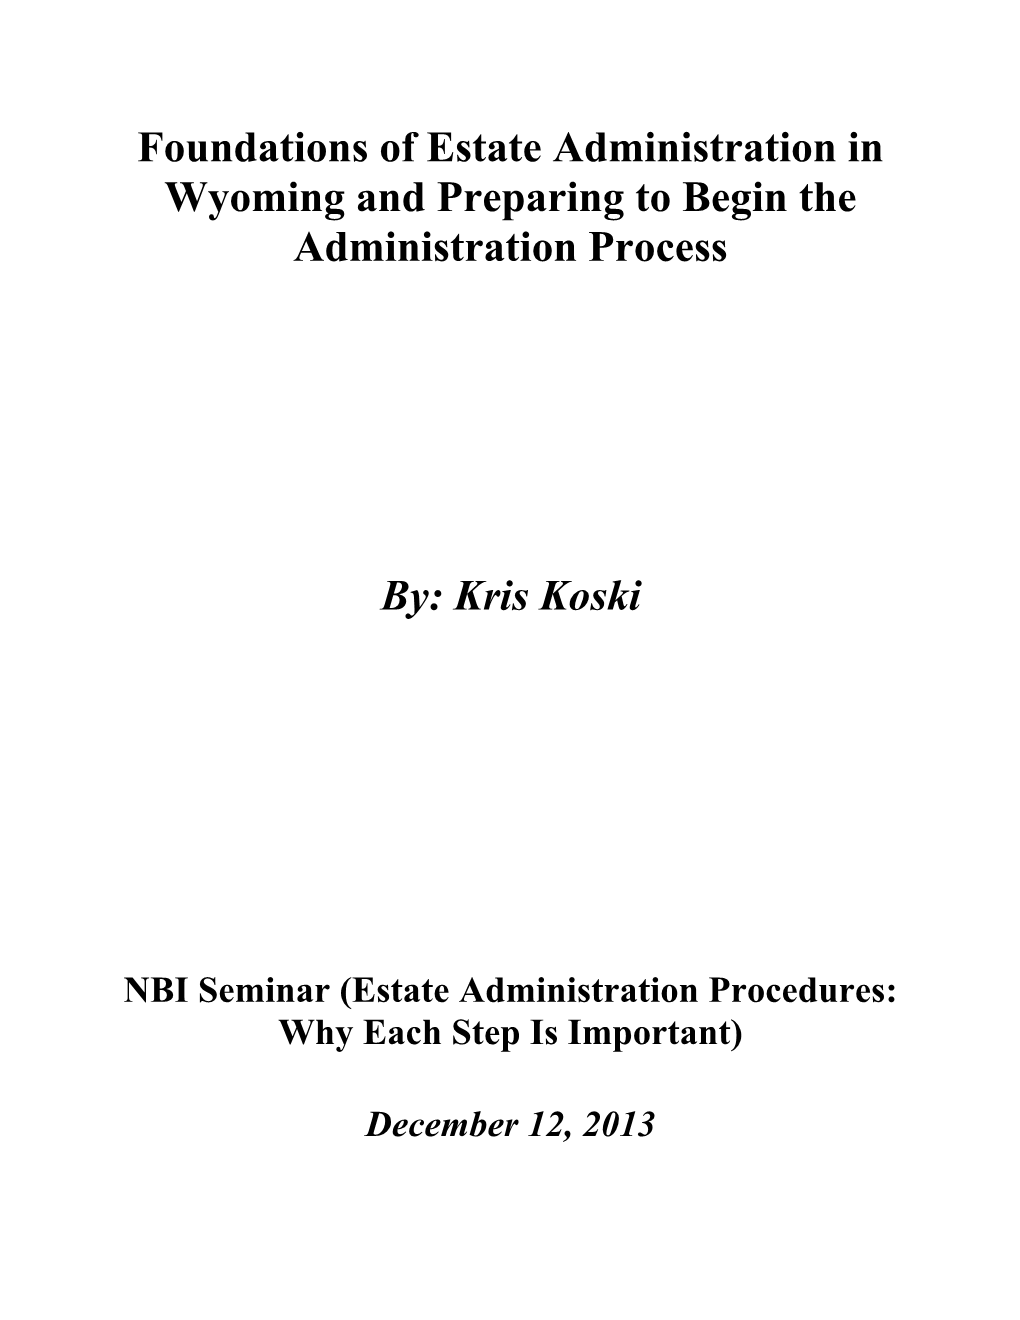 Foundations of Estate Administration in Wyoming and Preparing to Begin the Administration Process